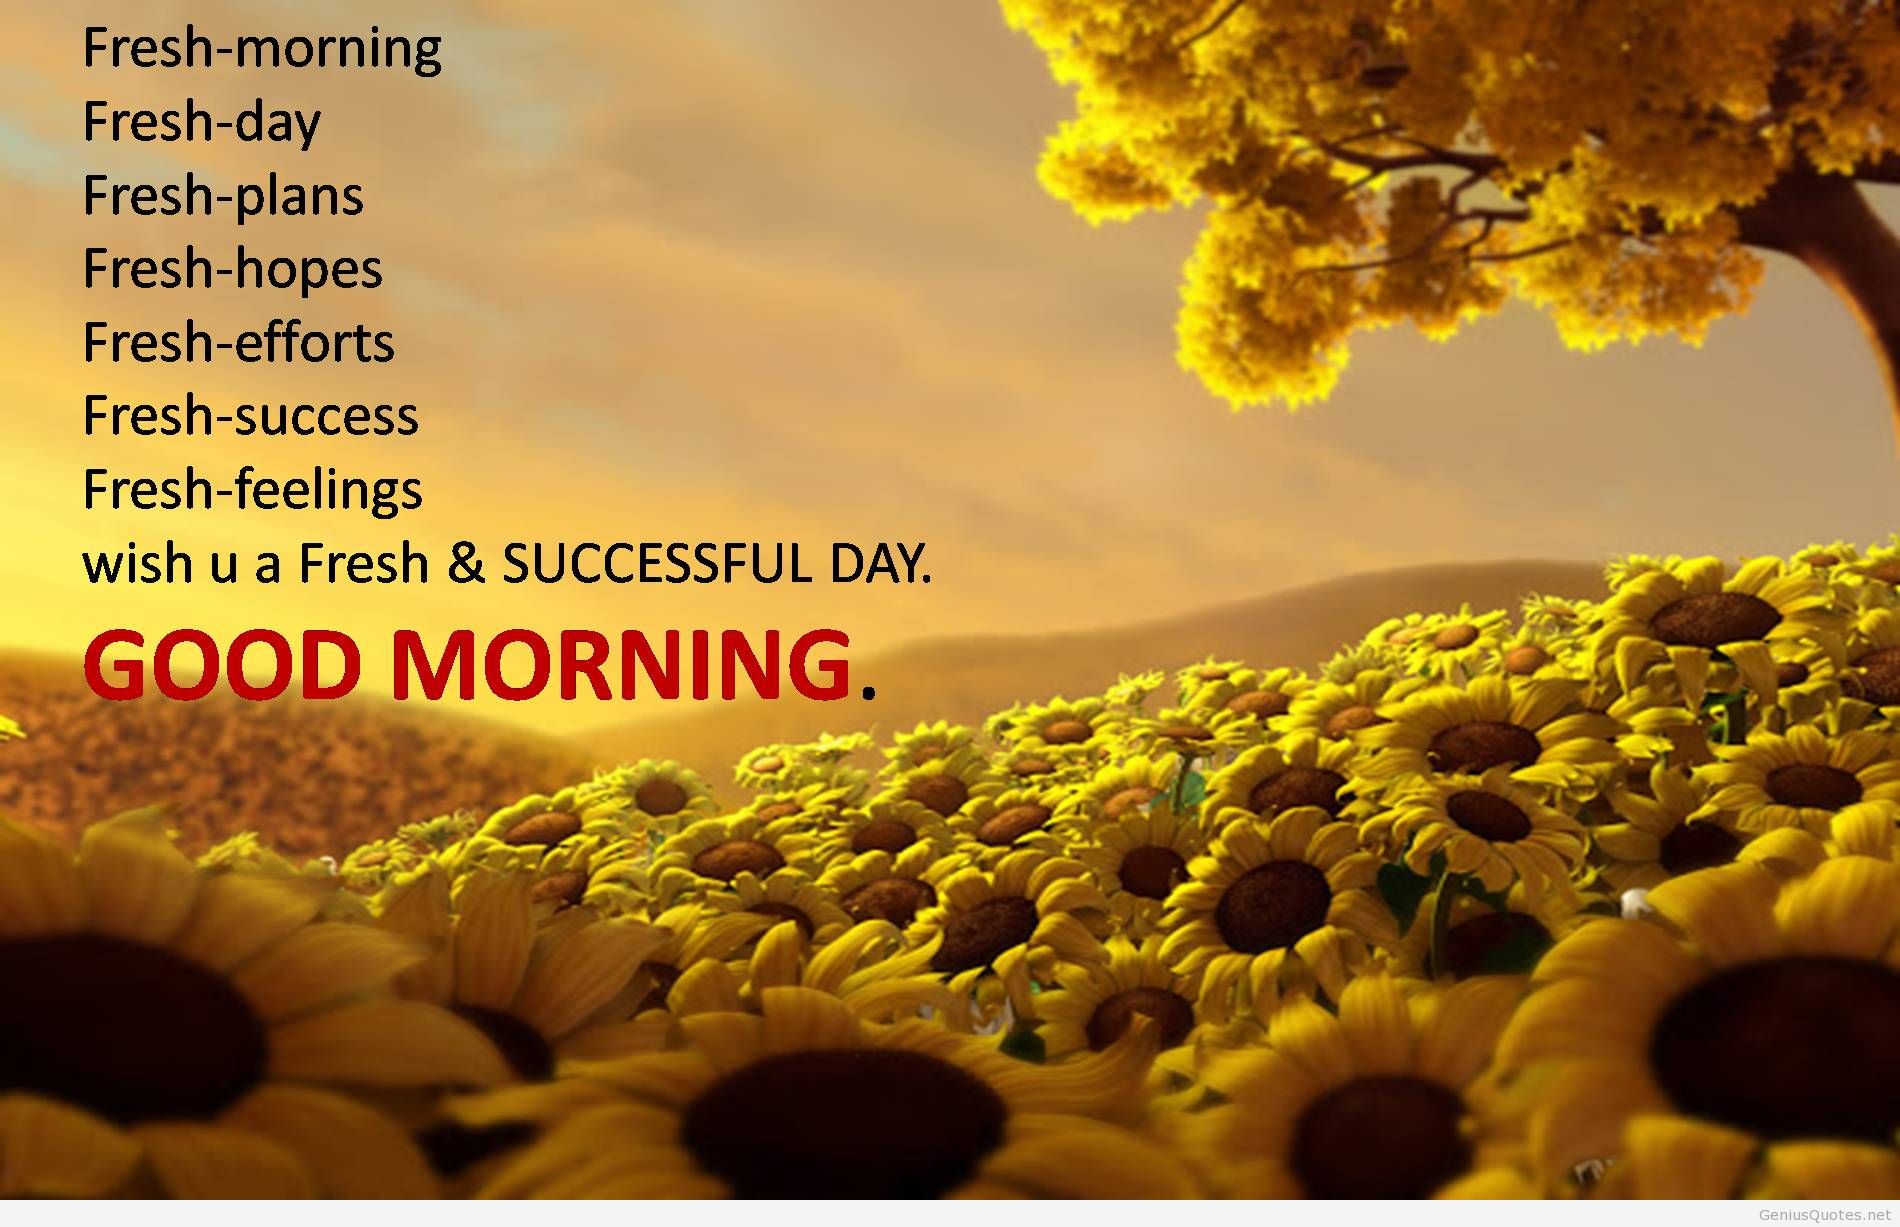 new-quotes-hd-good-morning-with-flowers-free